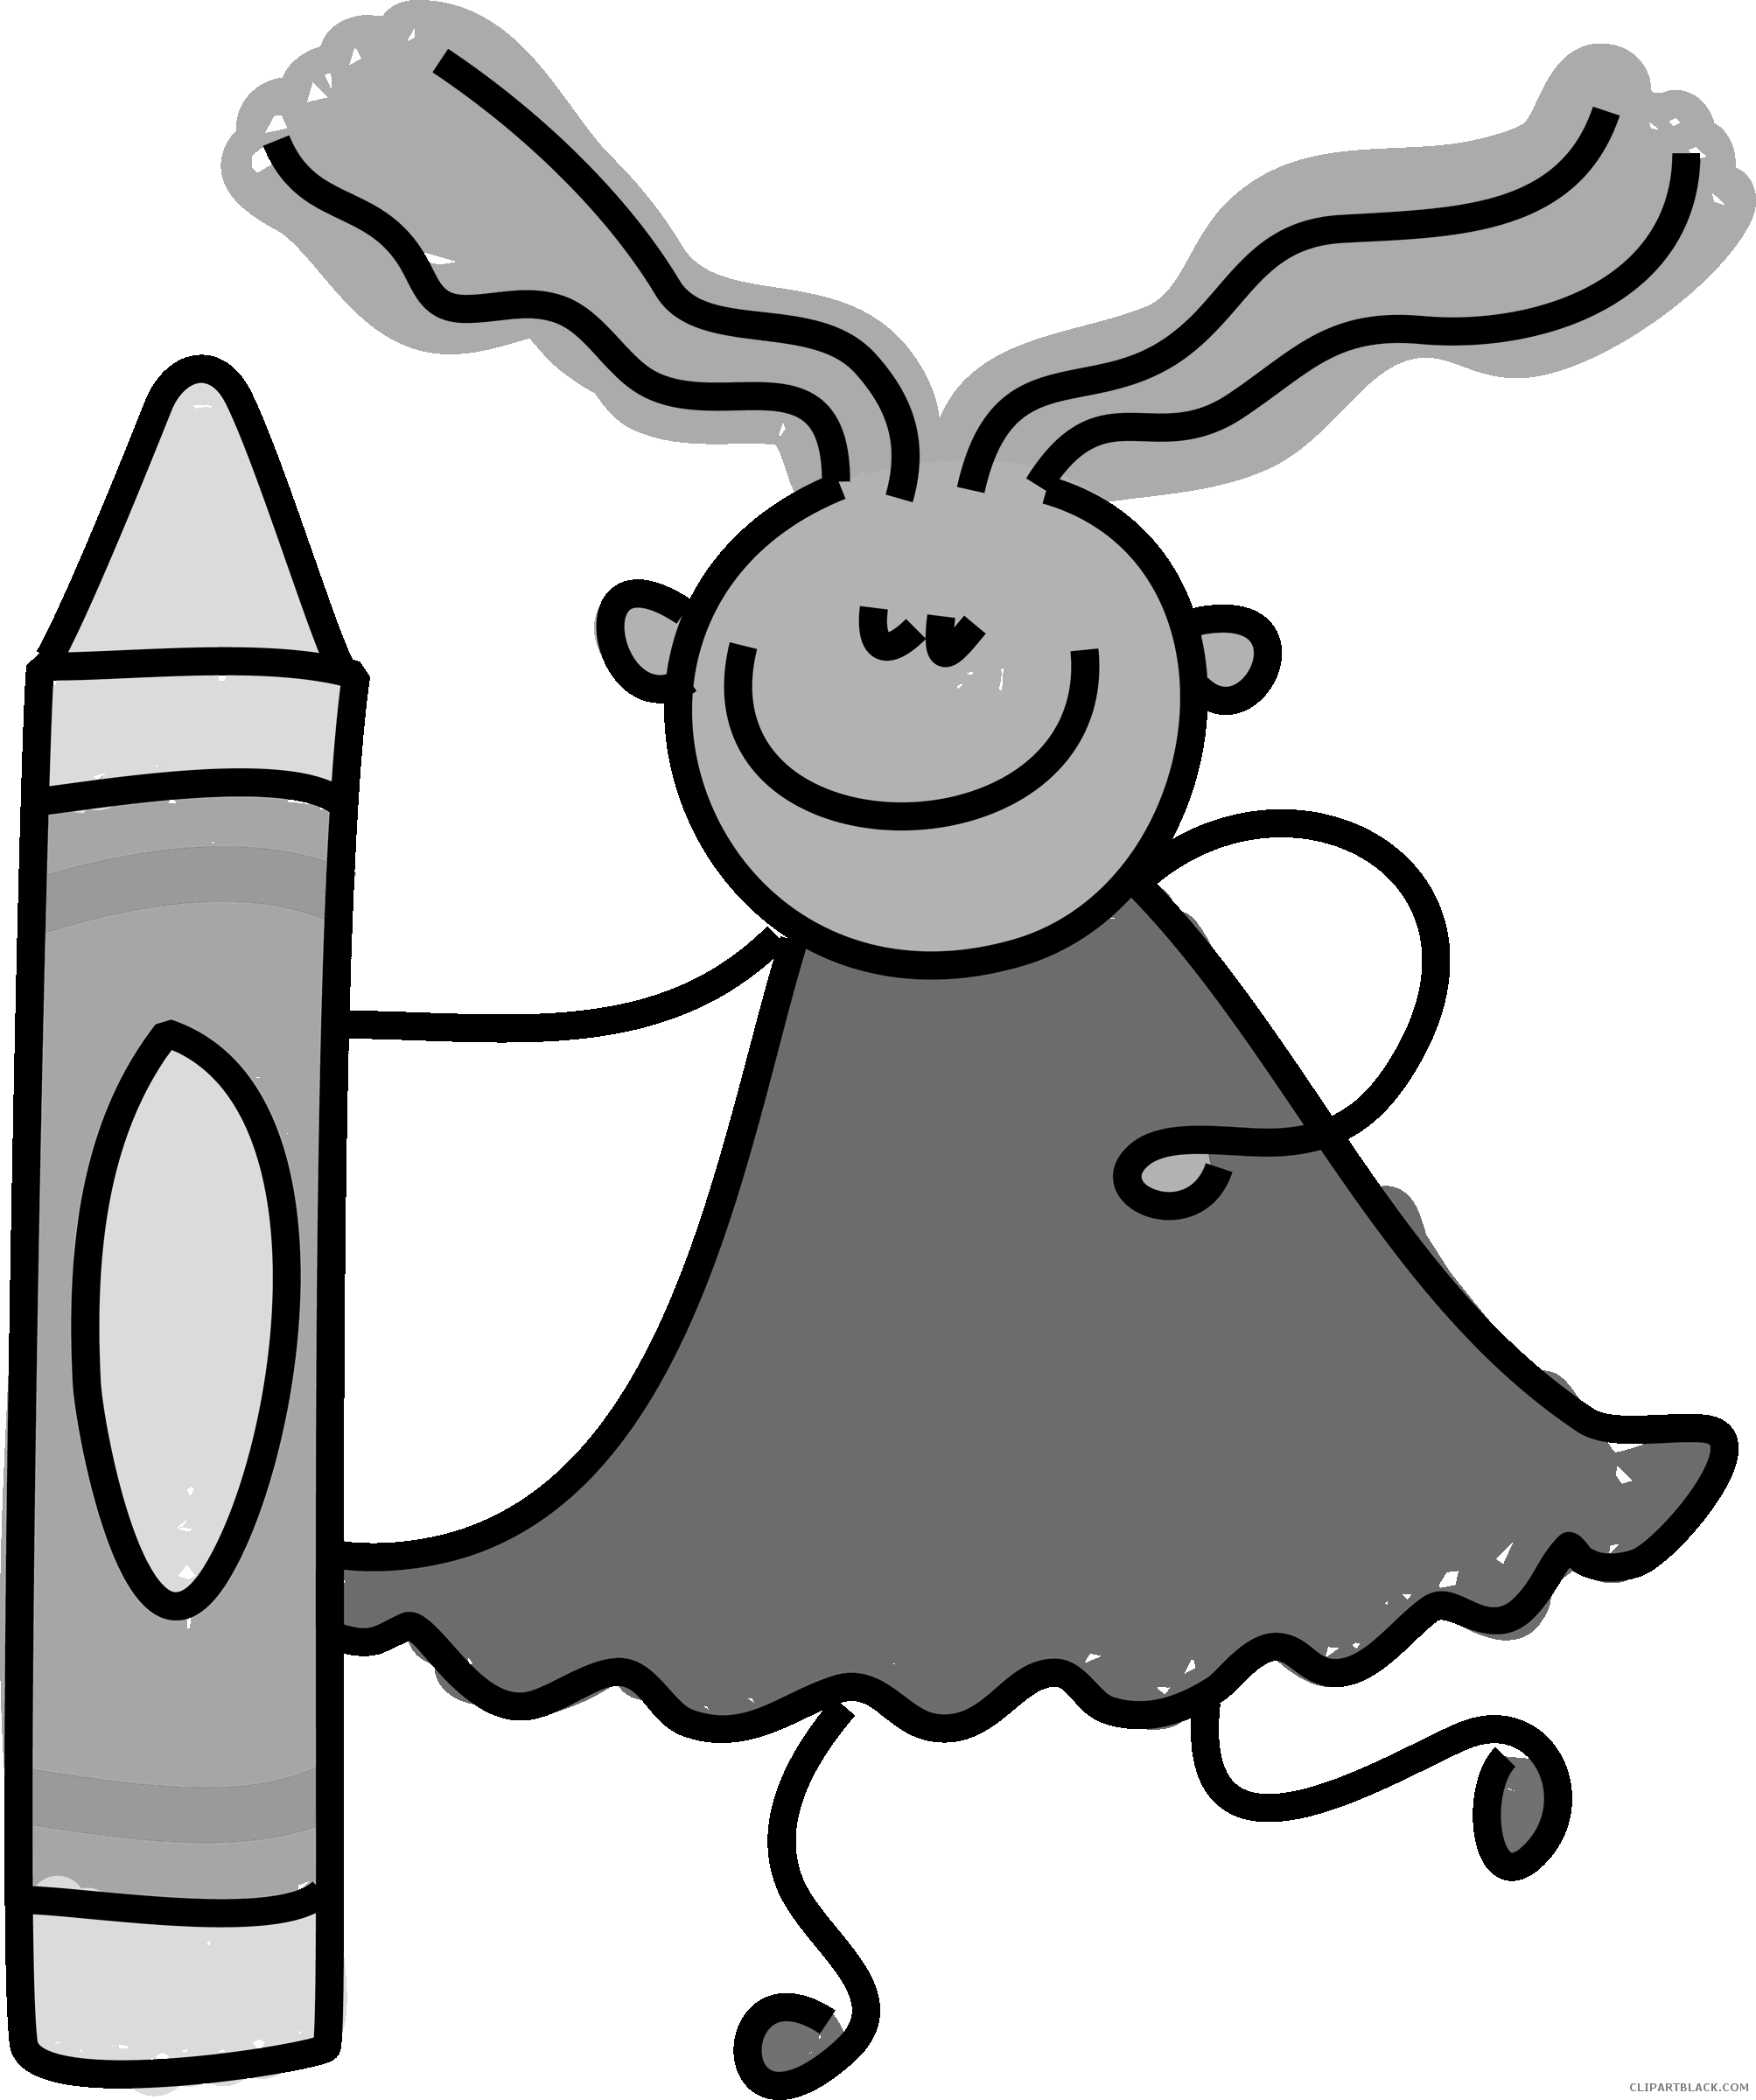 Page of clipartblack com. White clipart crayon